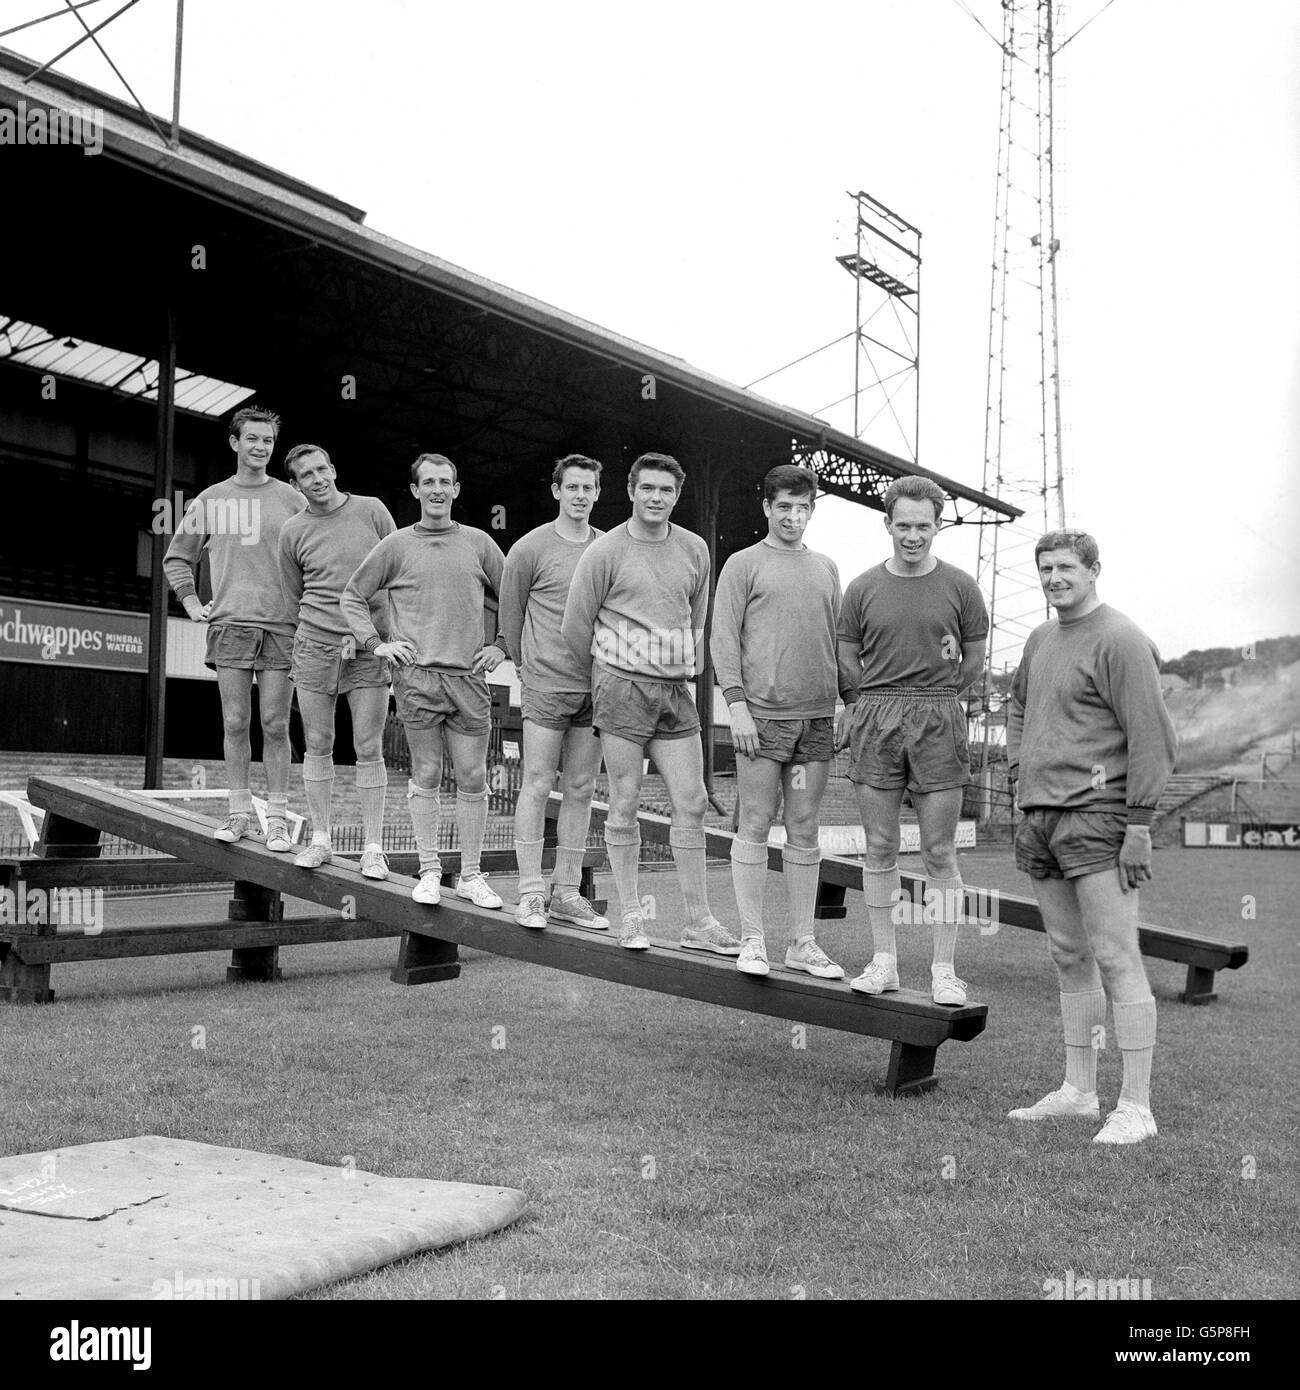 Derek Kevan (far right), who has just moved to Crystal Palace, meets other former West Bromwich Albion players who are now with the London club. From left: Brian Wood, Brian Whitehouse, Dave Burnside, Keith Smith, Tony Millington, Jack Bannister and Roy Horobin. Stock Photo